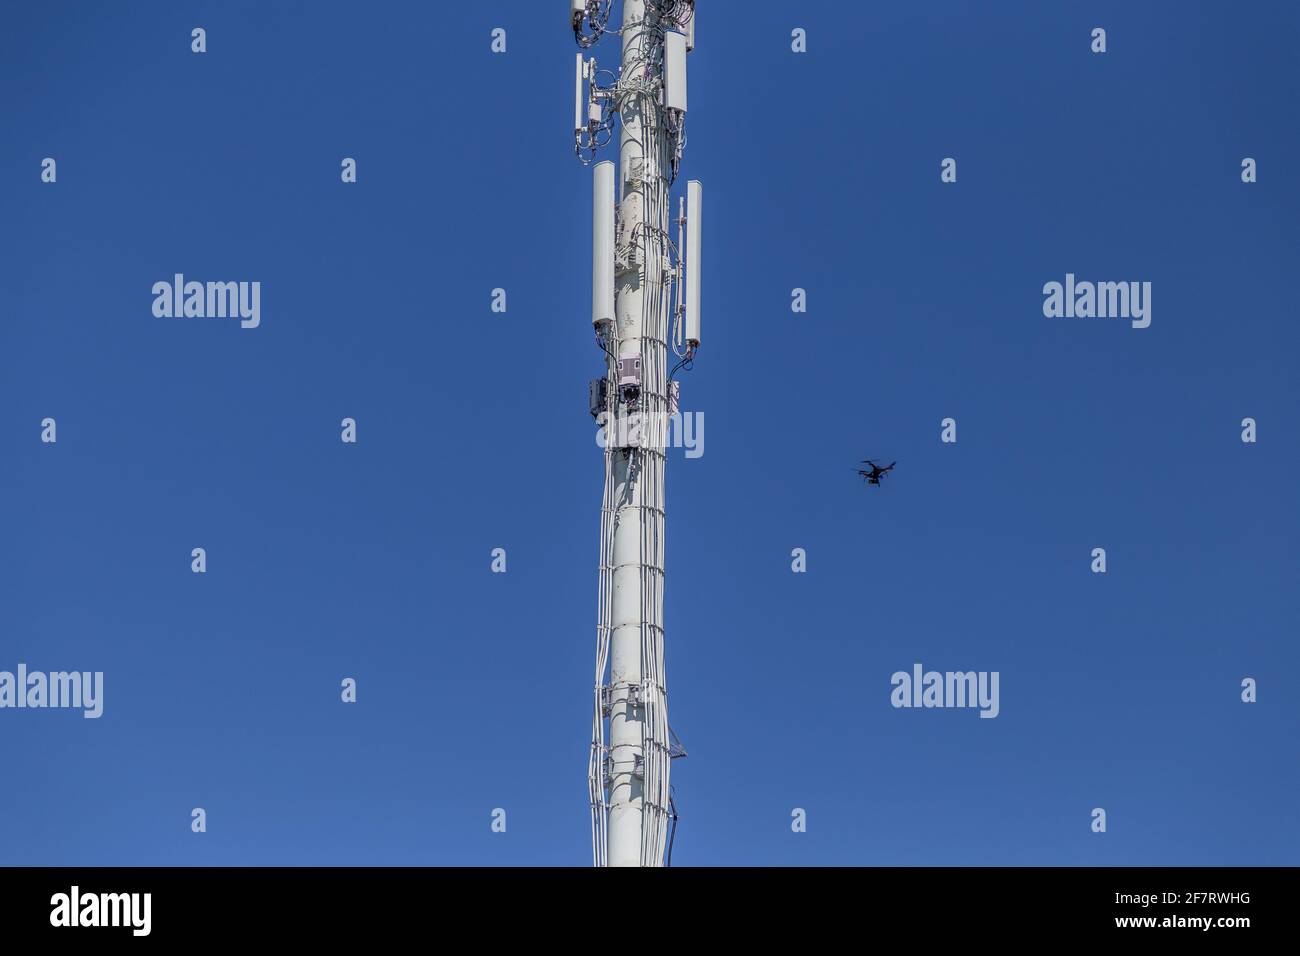 Drone inspecting a cell tower on the lower right Stock Photo